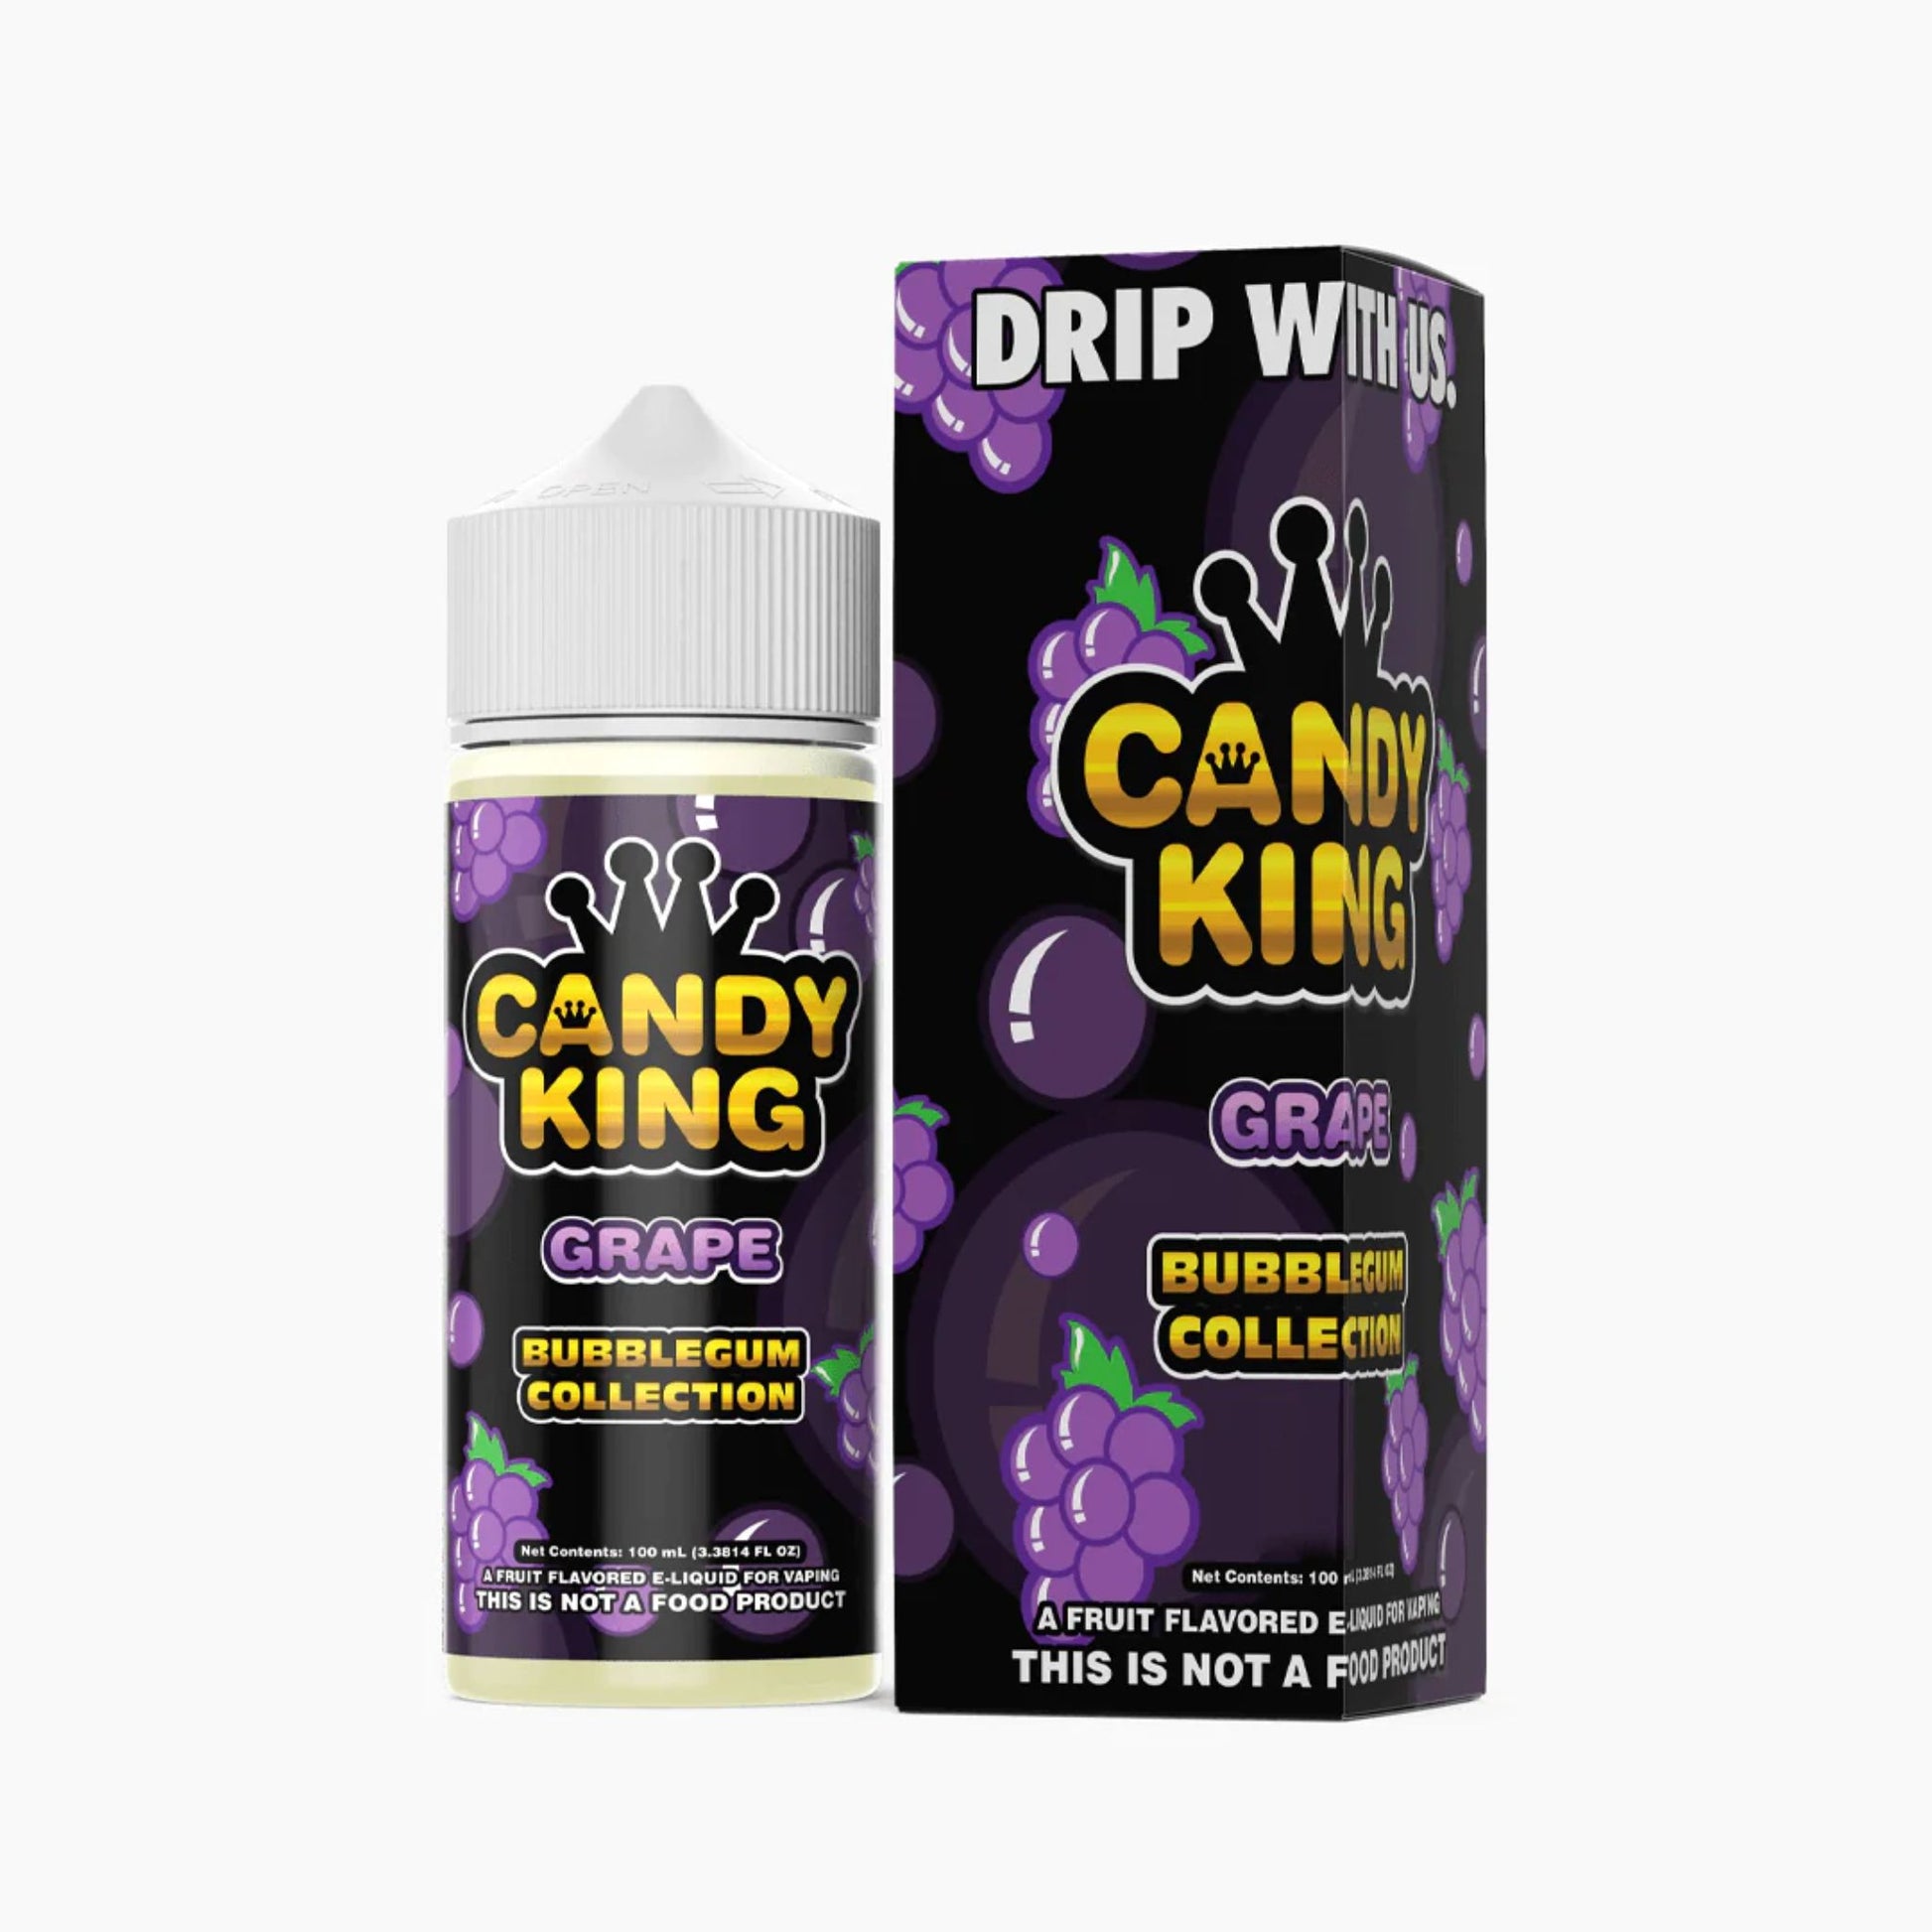 Candy King Bubblegum Collection | Grape | 100ml bottle and box